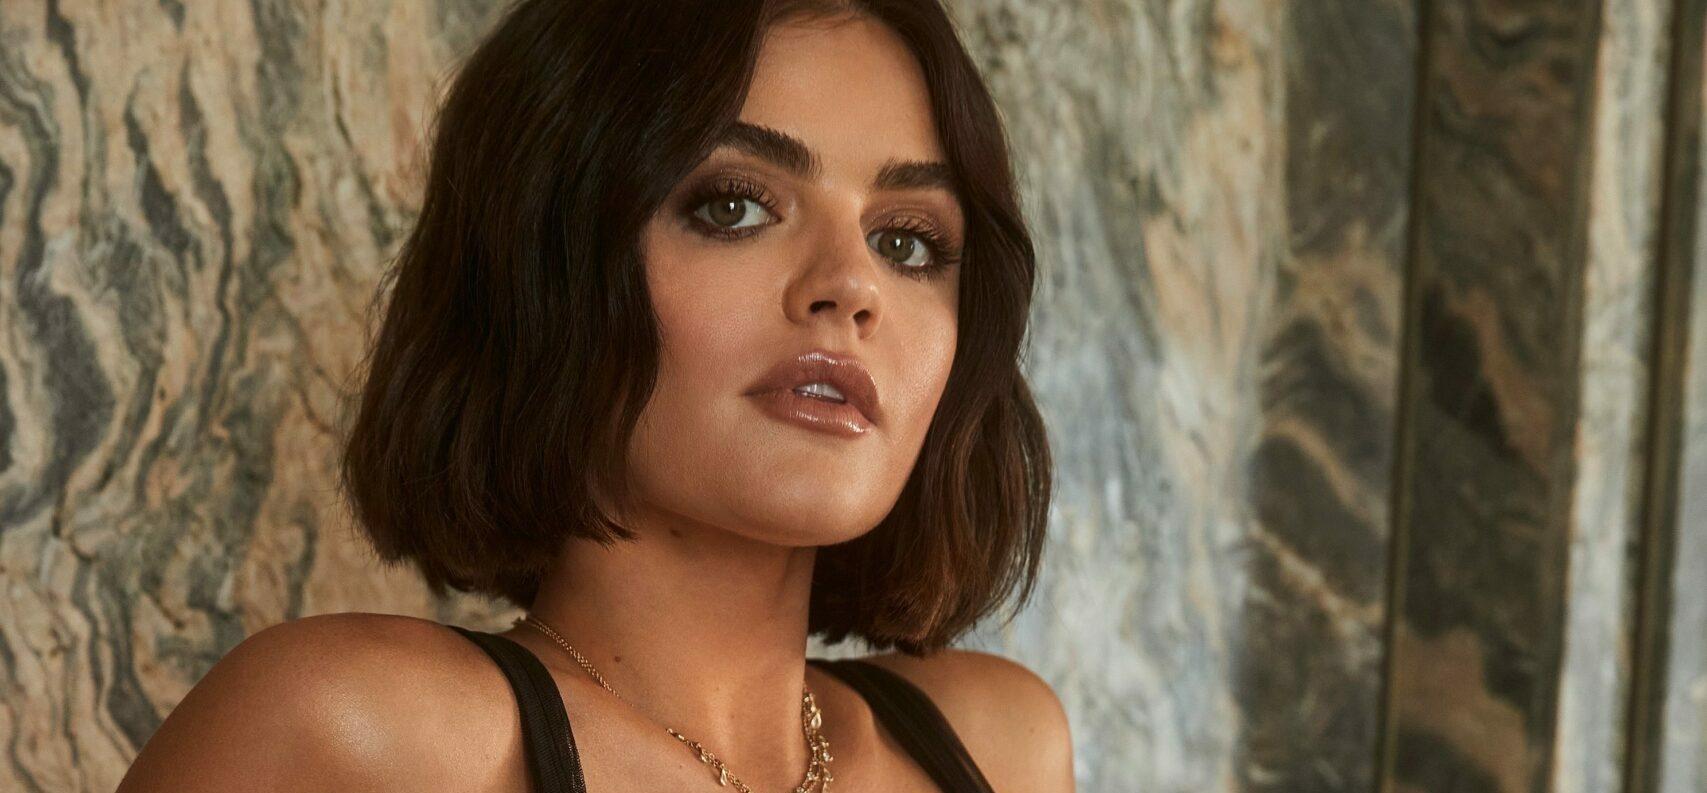 Pretty Little Liars star Lucy Hale wows in lingerie campaign